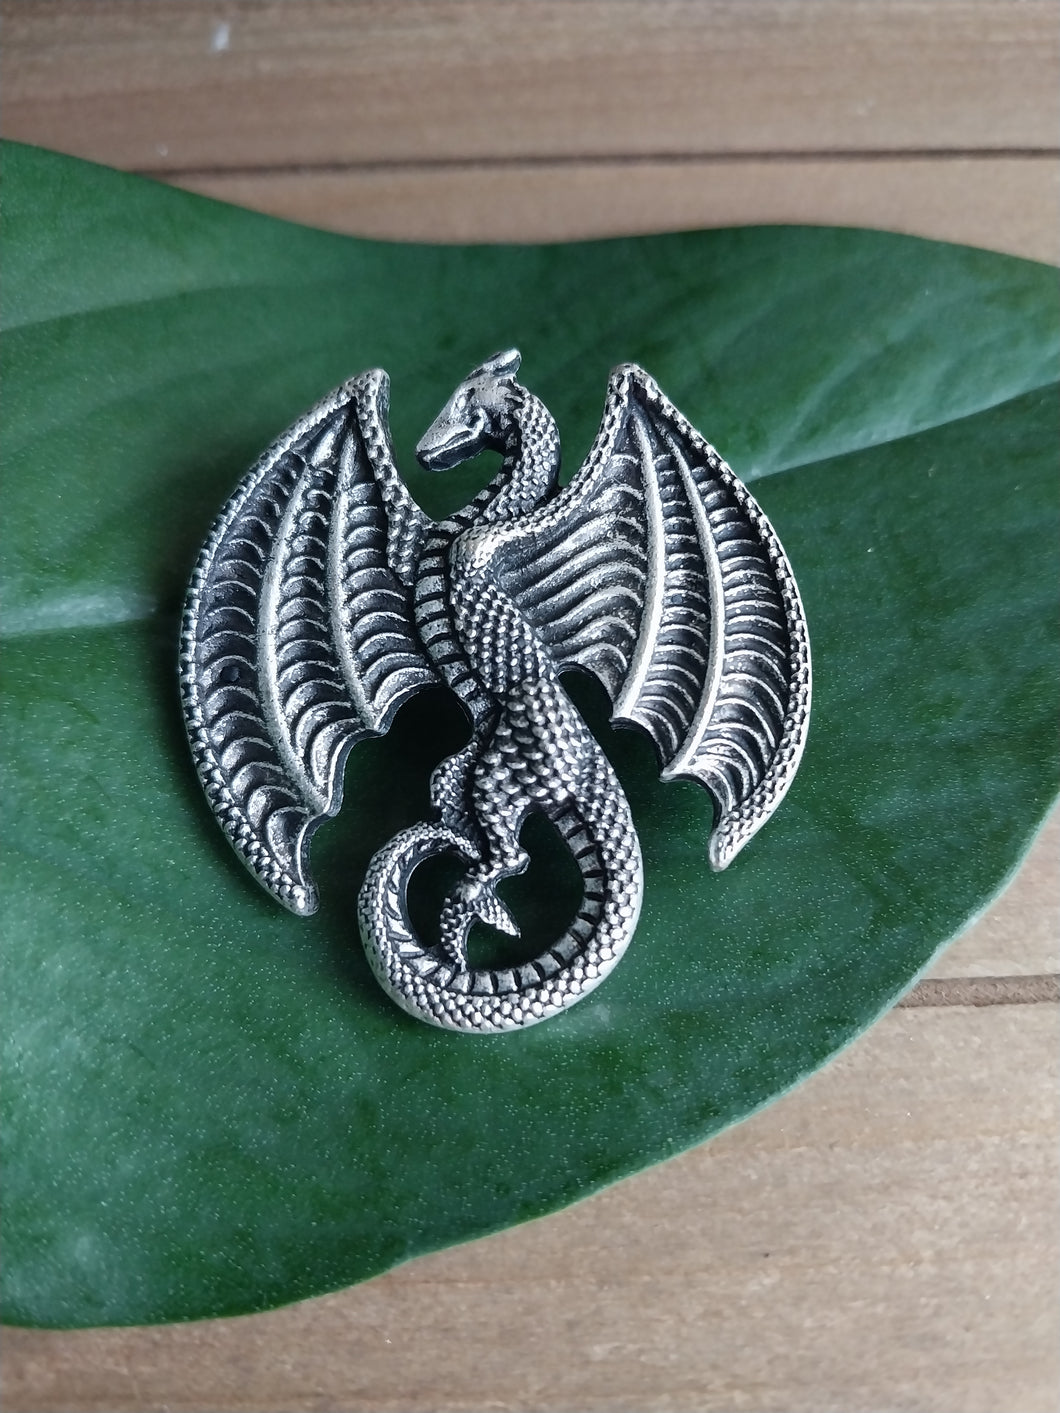 Awesome Dragon Brooch